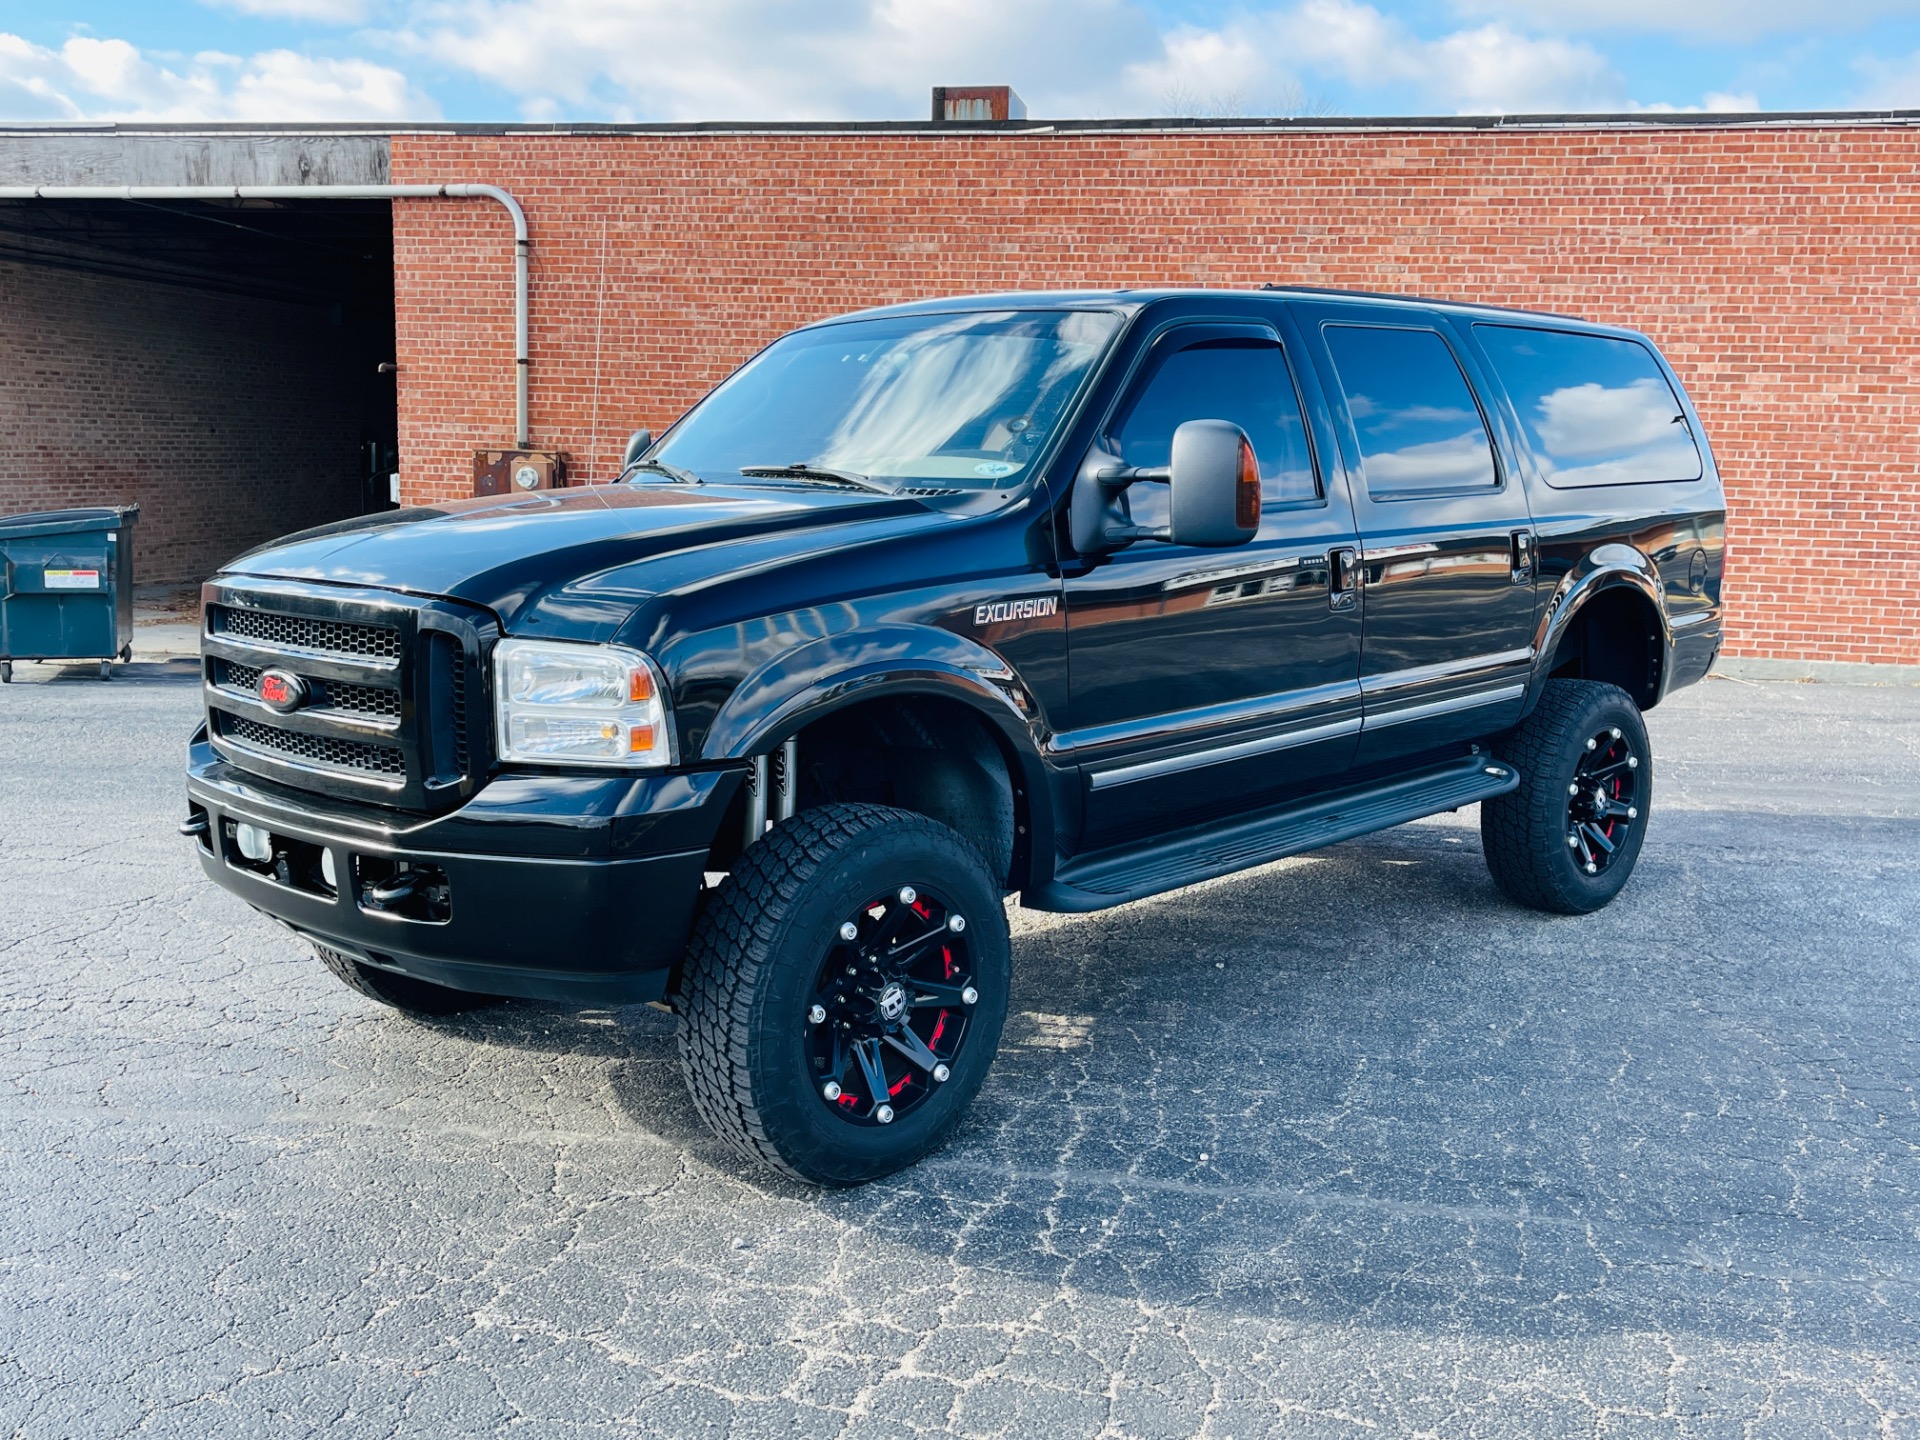 2005 ford excursion tire size